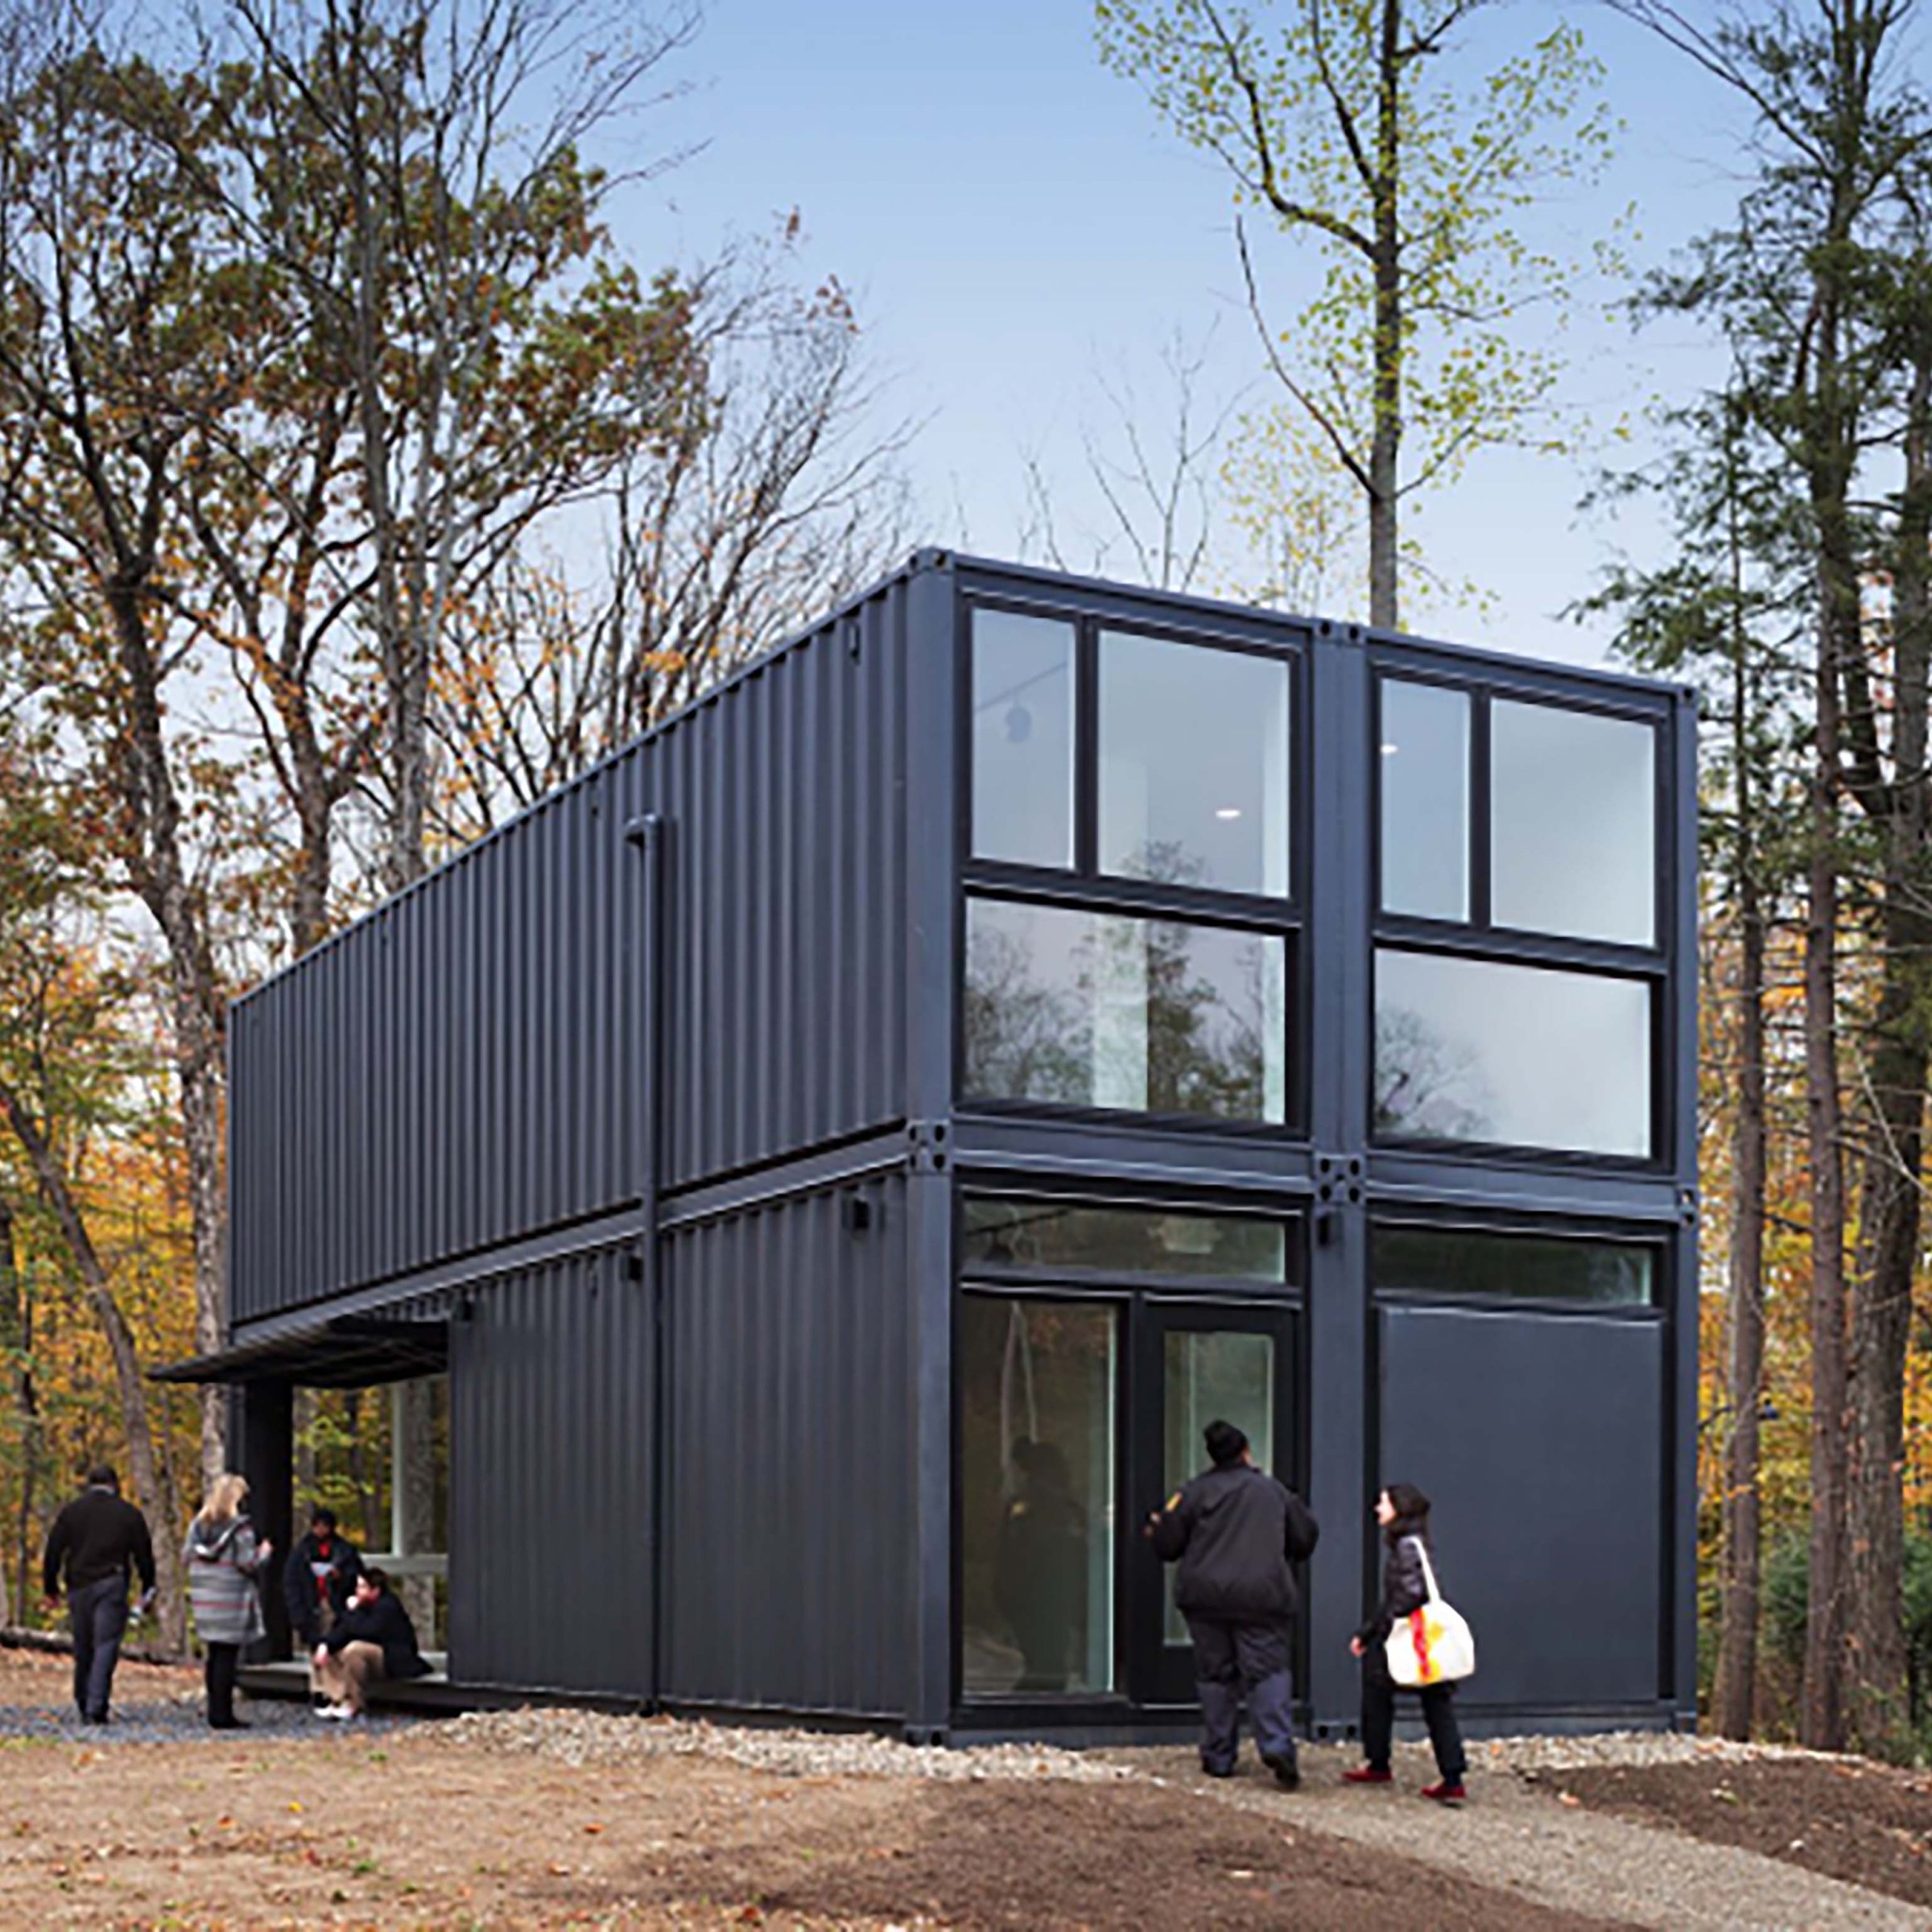 Black revamped, modern shipping container in forest with people around